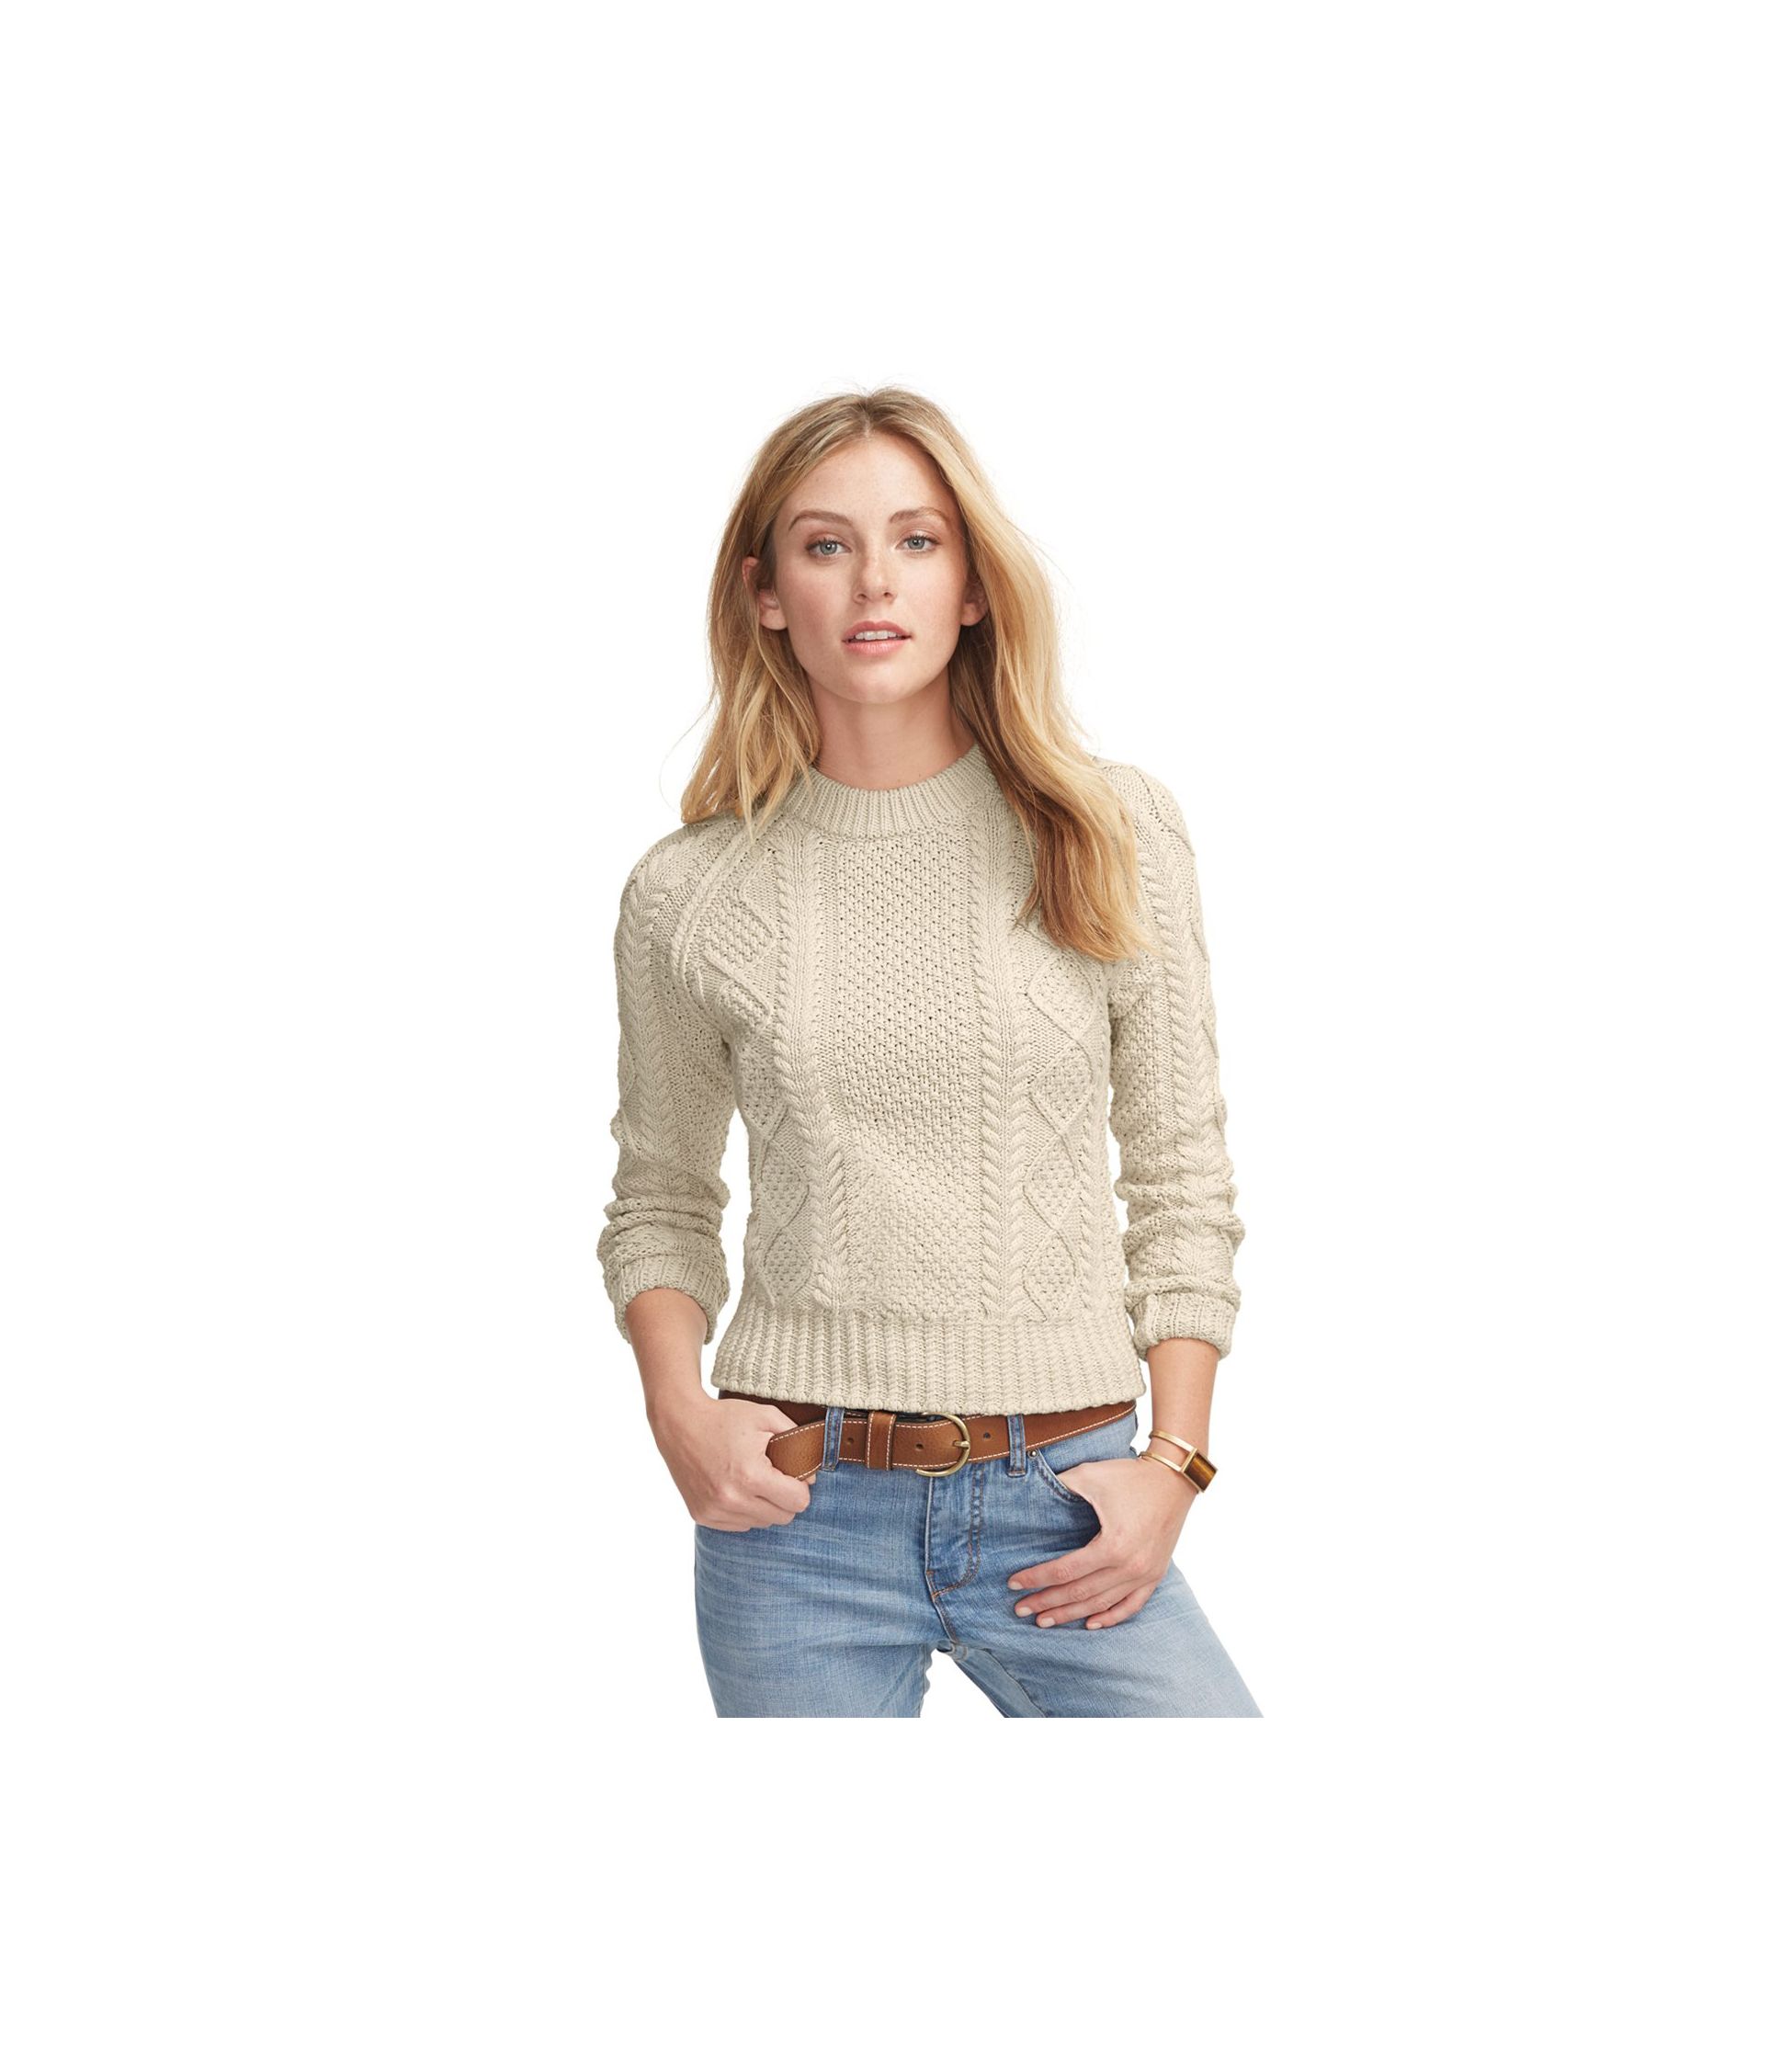 Middle ages fitted stretch cotton crew neck sweater women outlet like venus